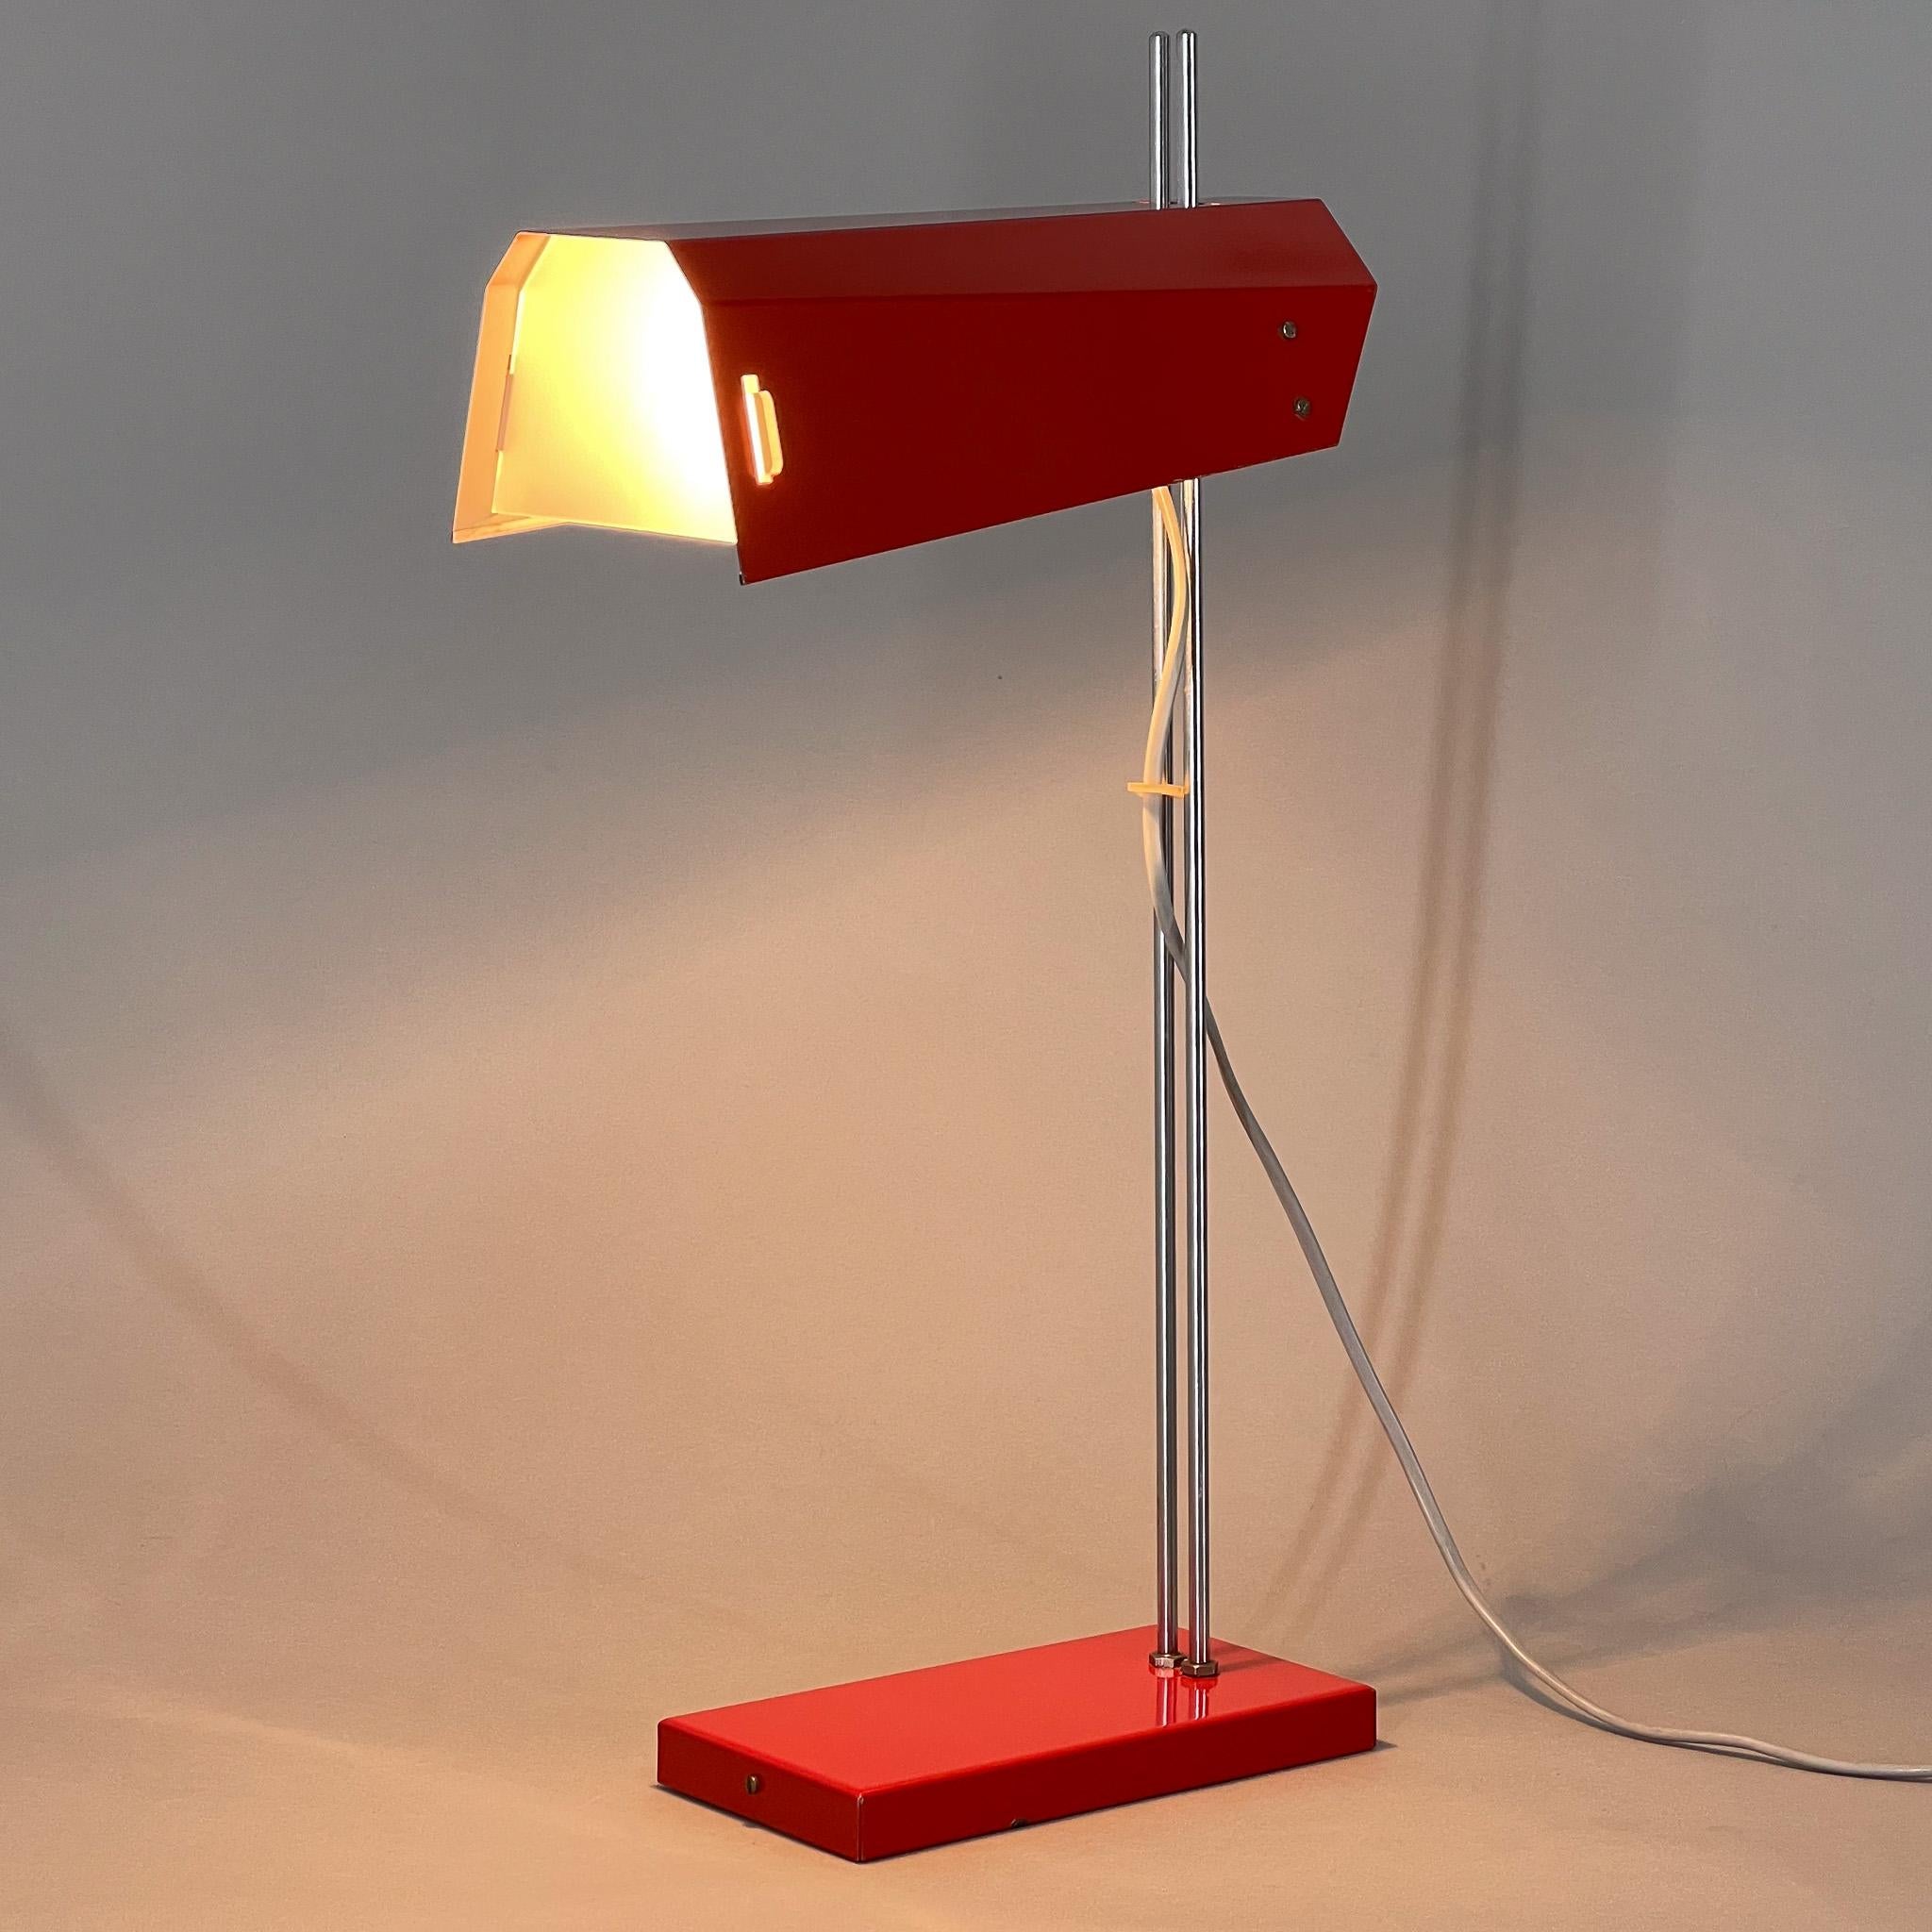 Vintage red teal and chrome table or desk lamp with adjustable lamp shade hight. Produced by Lidokov in former Czechoslovakia in the 1970's.
Us adapter included.
Bulb: 1x E26-E27.